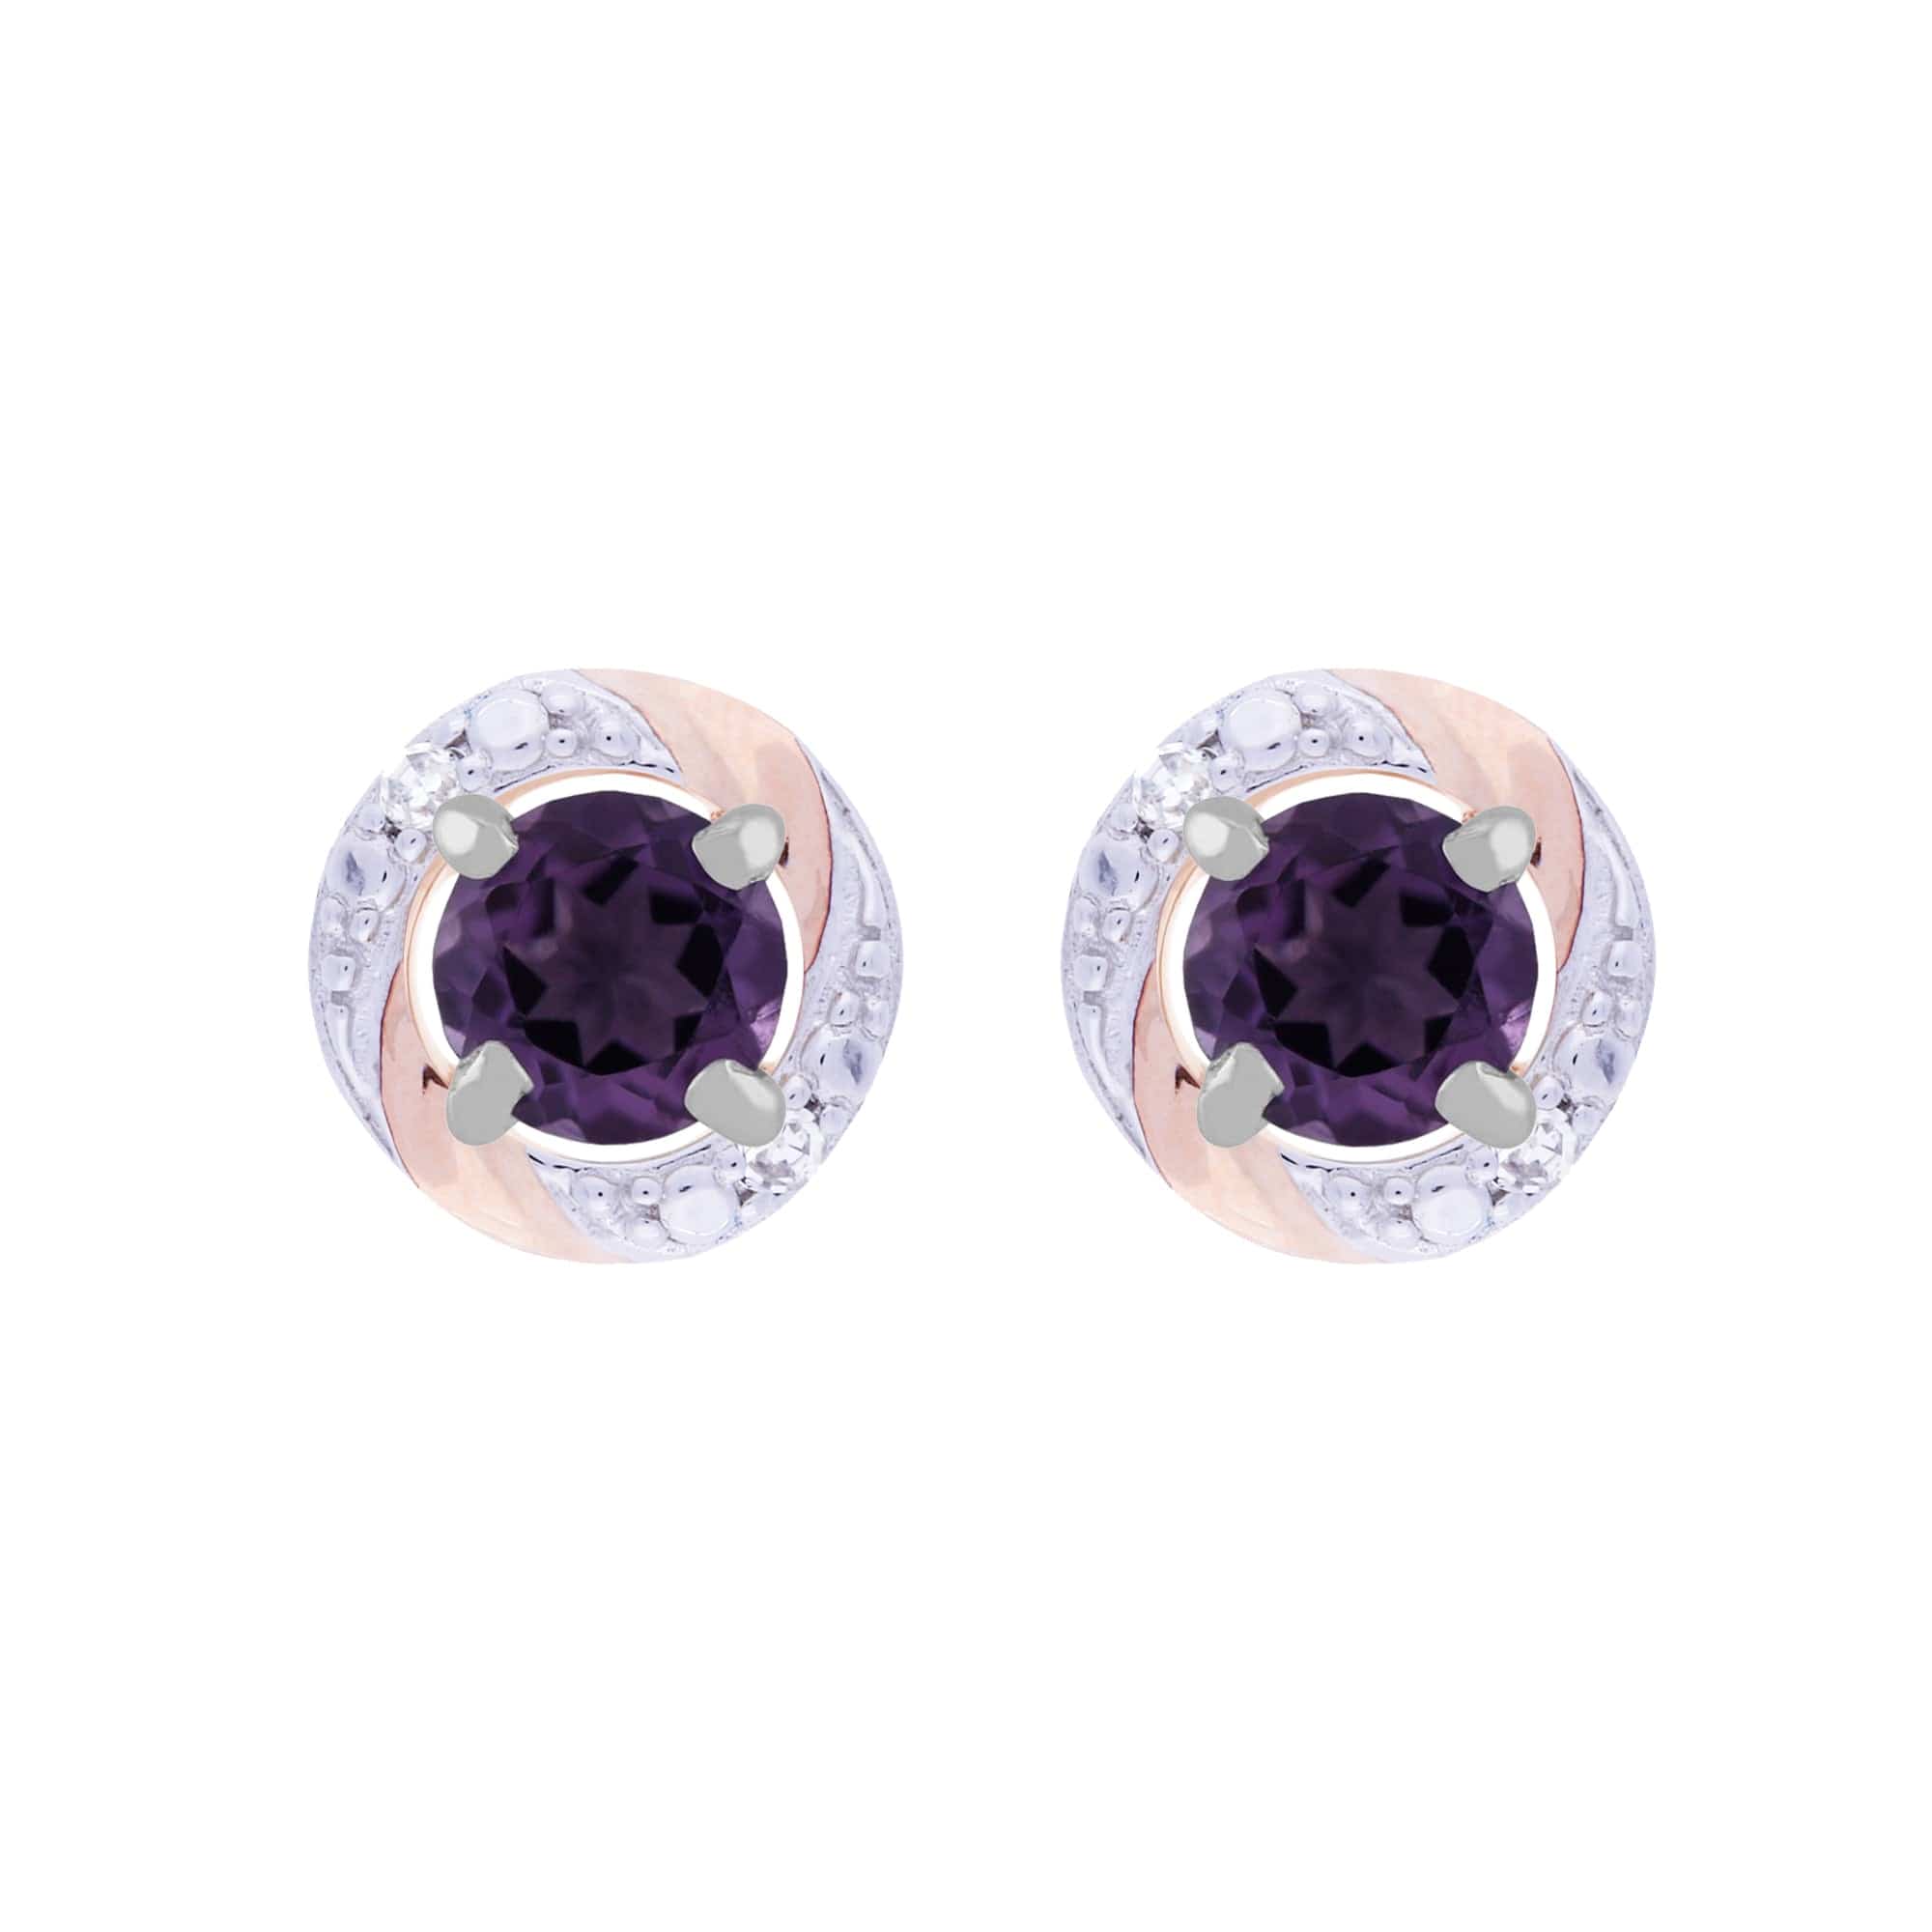 11612-191E0378019 Classic Round Amethyst Stud Earrings with Detachable Diamond Round Earrings Jacket Set in 9ct White Gold 1